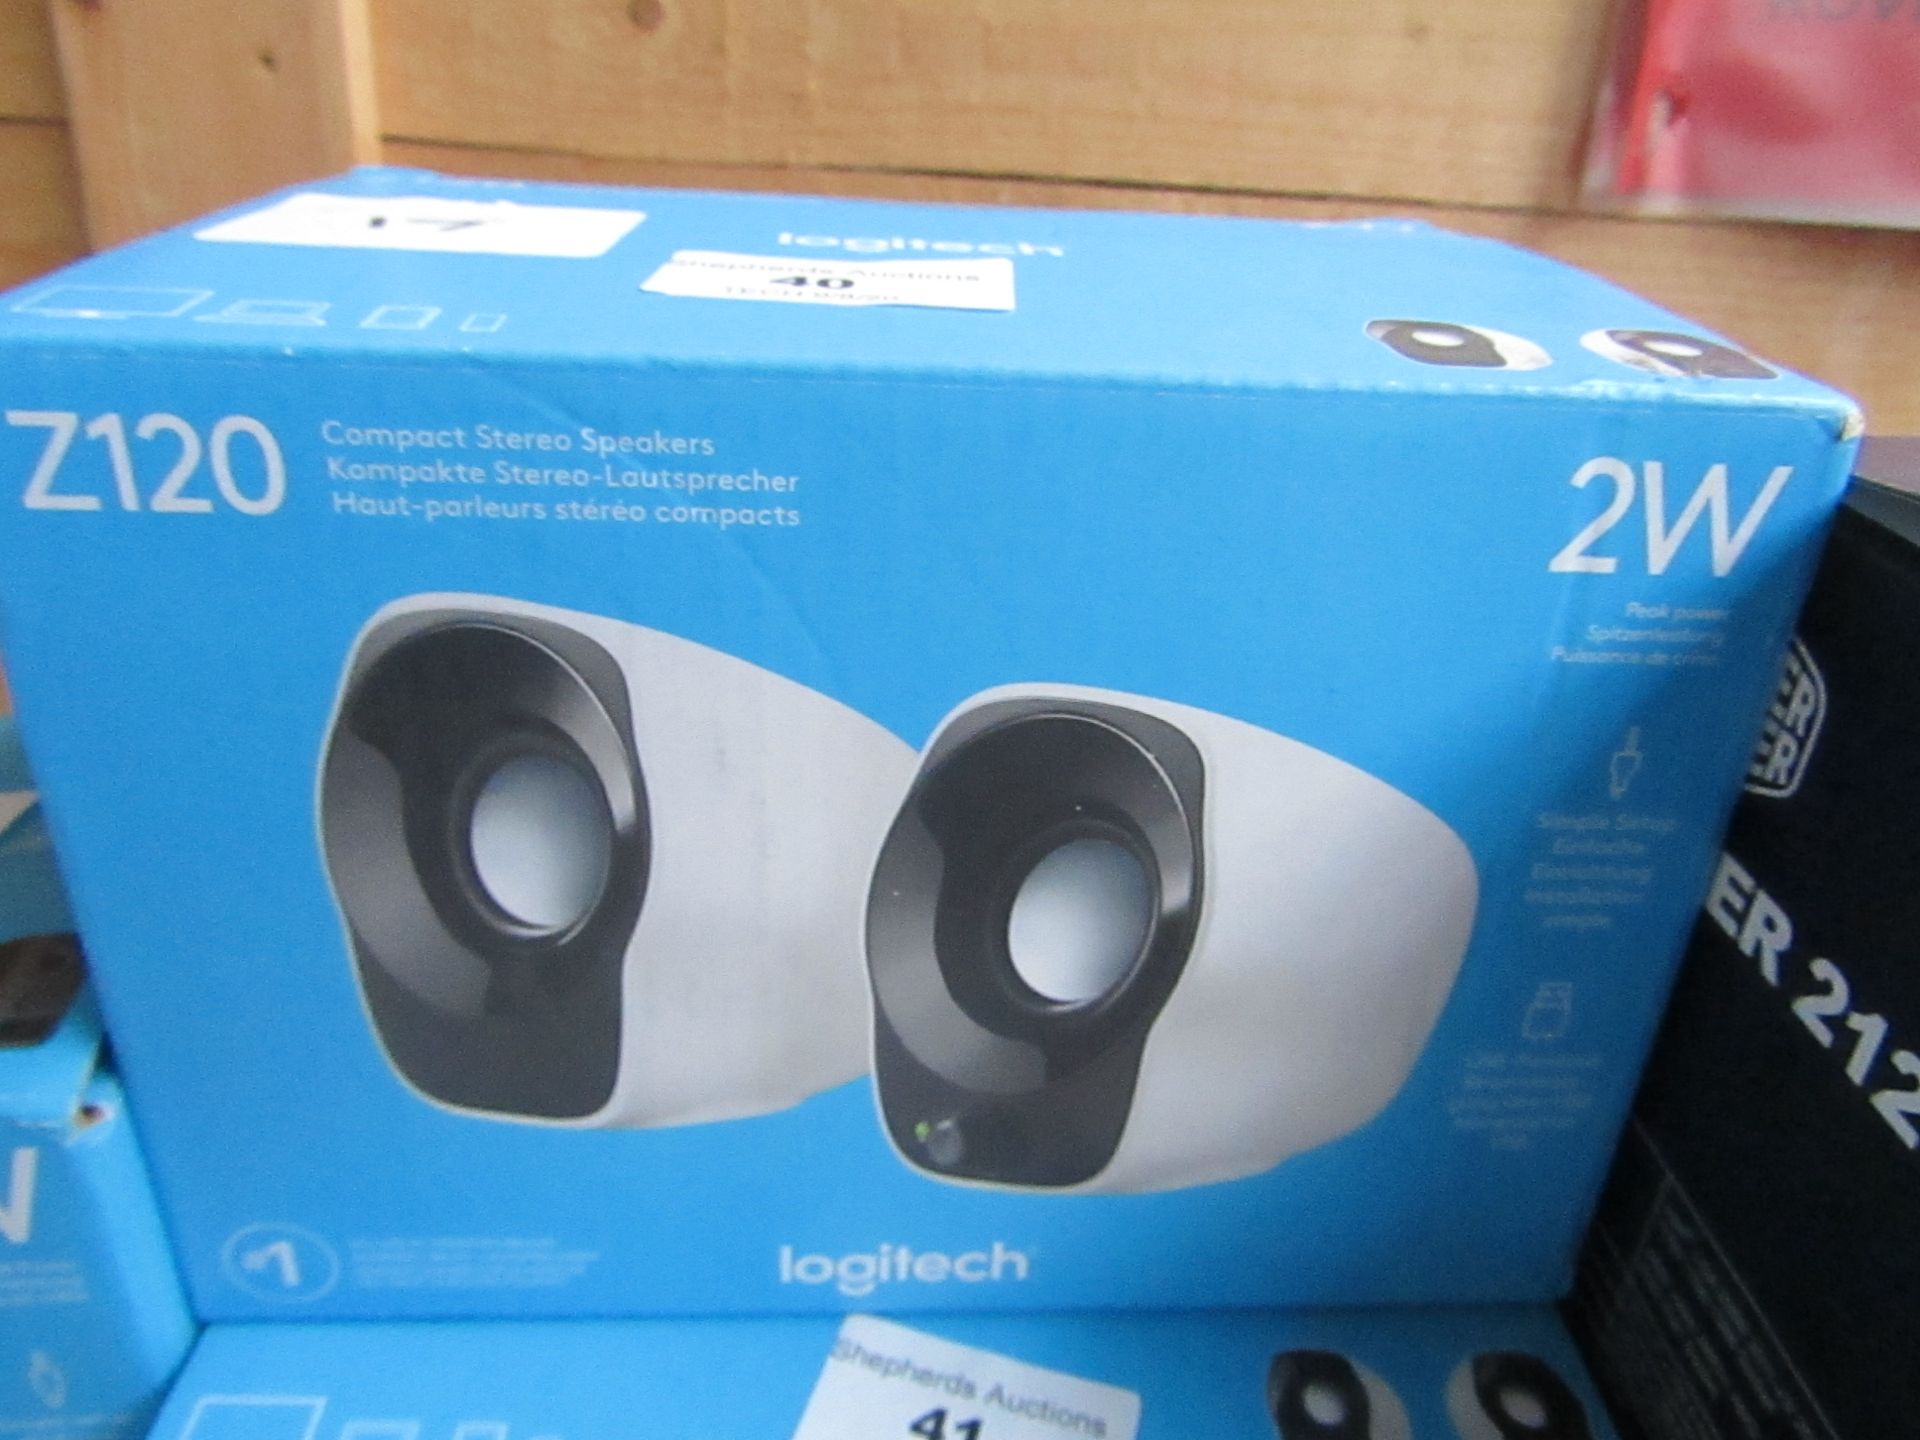 Logitech Z120 set of 2W compact stereo sound speakers, unchecked and boxed